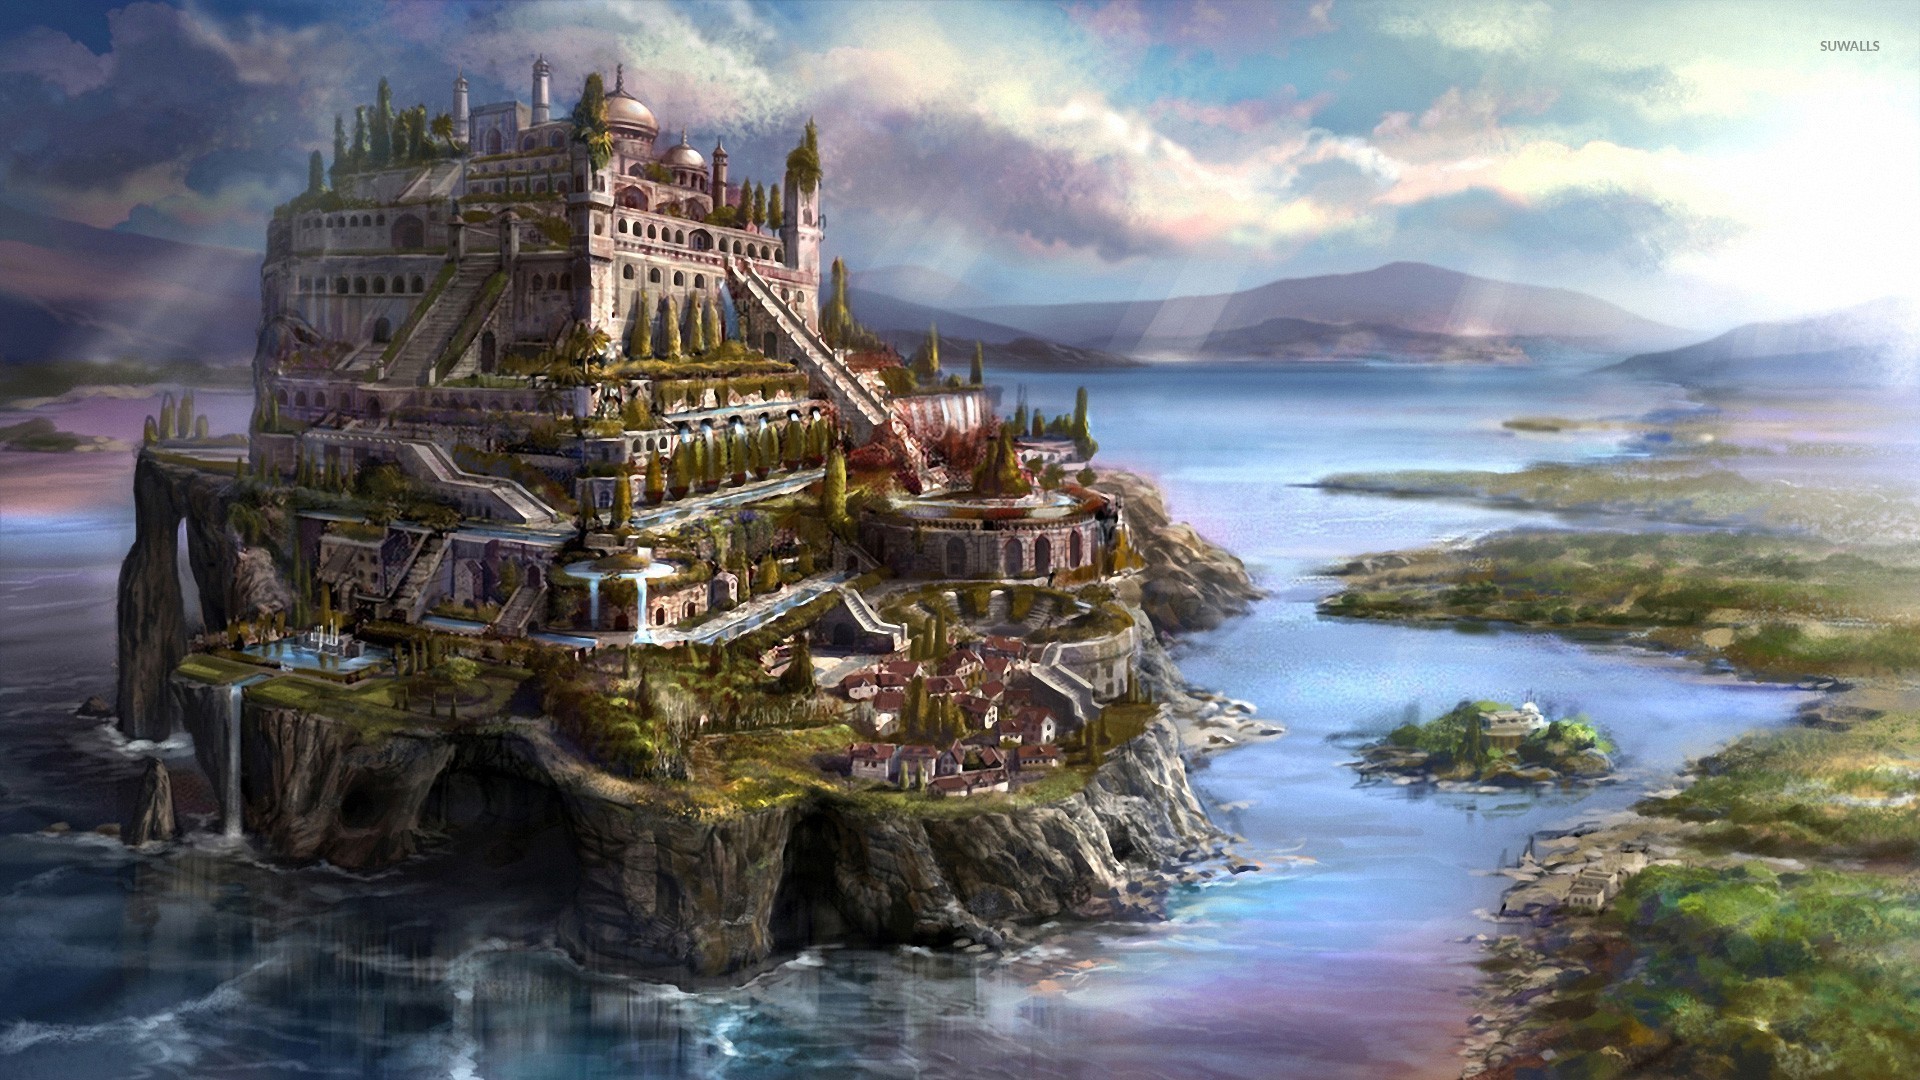 Amazing Kingdom Pictures & Backgrounds